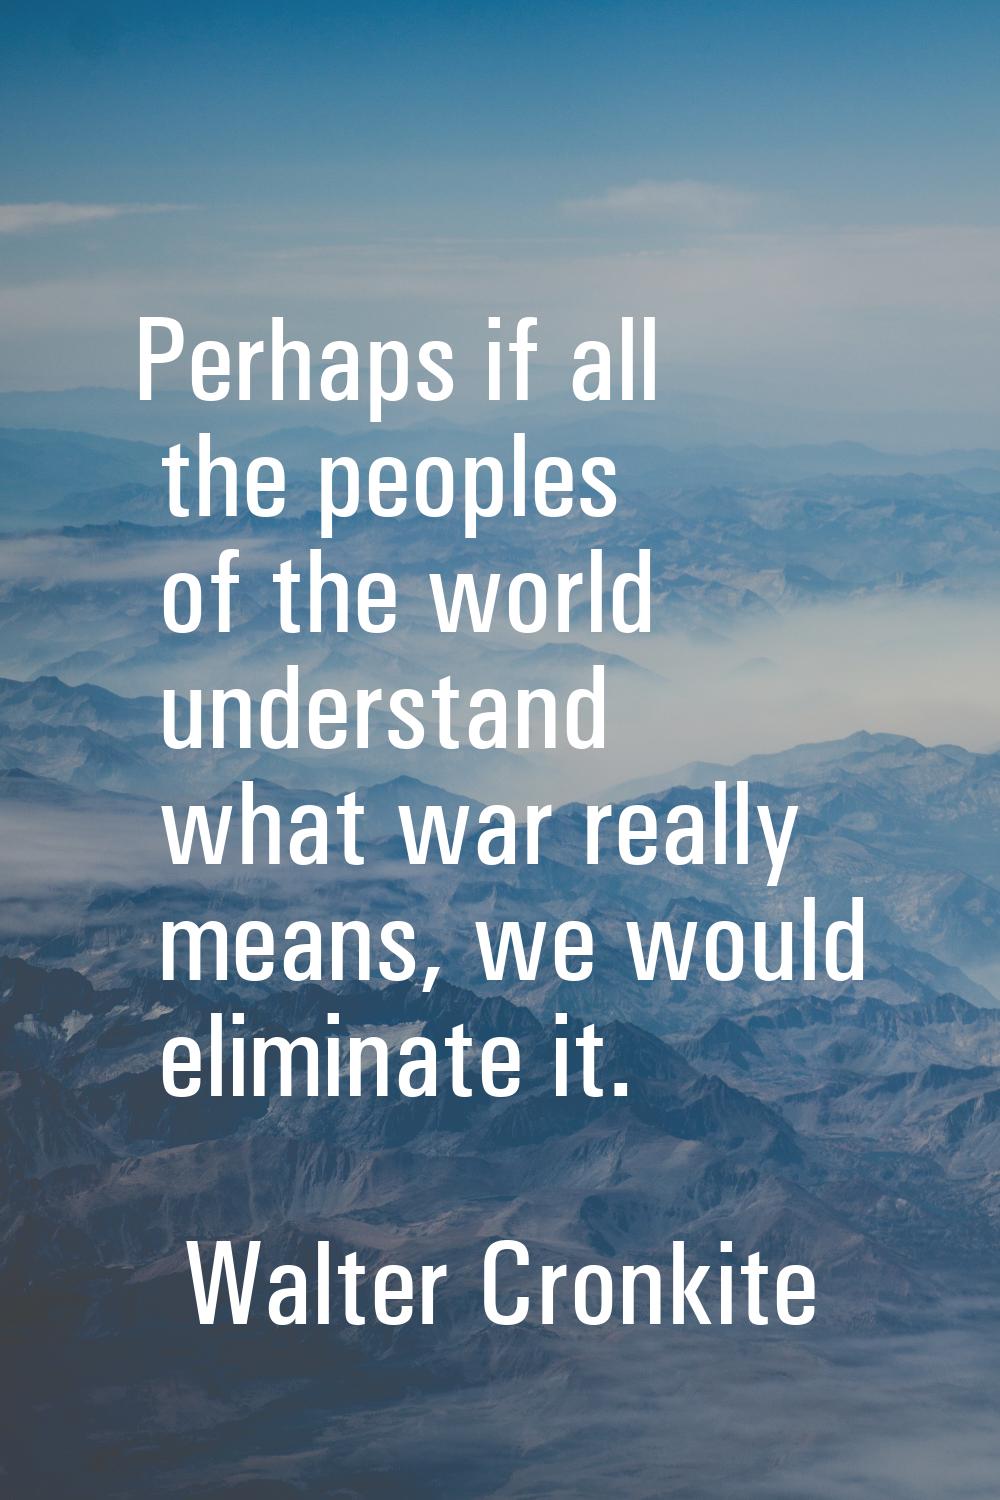 Perhaps if all the peoples of the world understand what war really means, we would eliminate it.